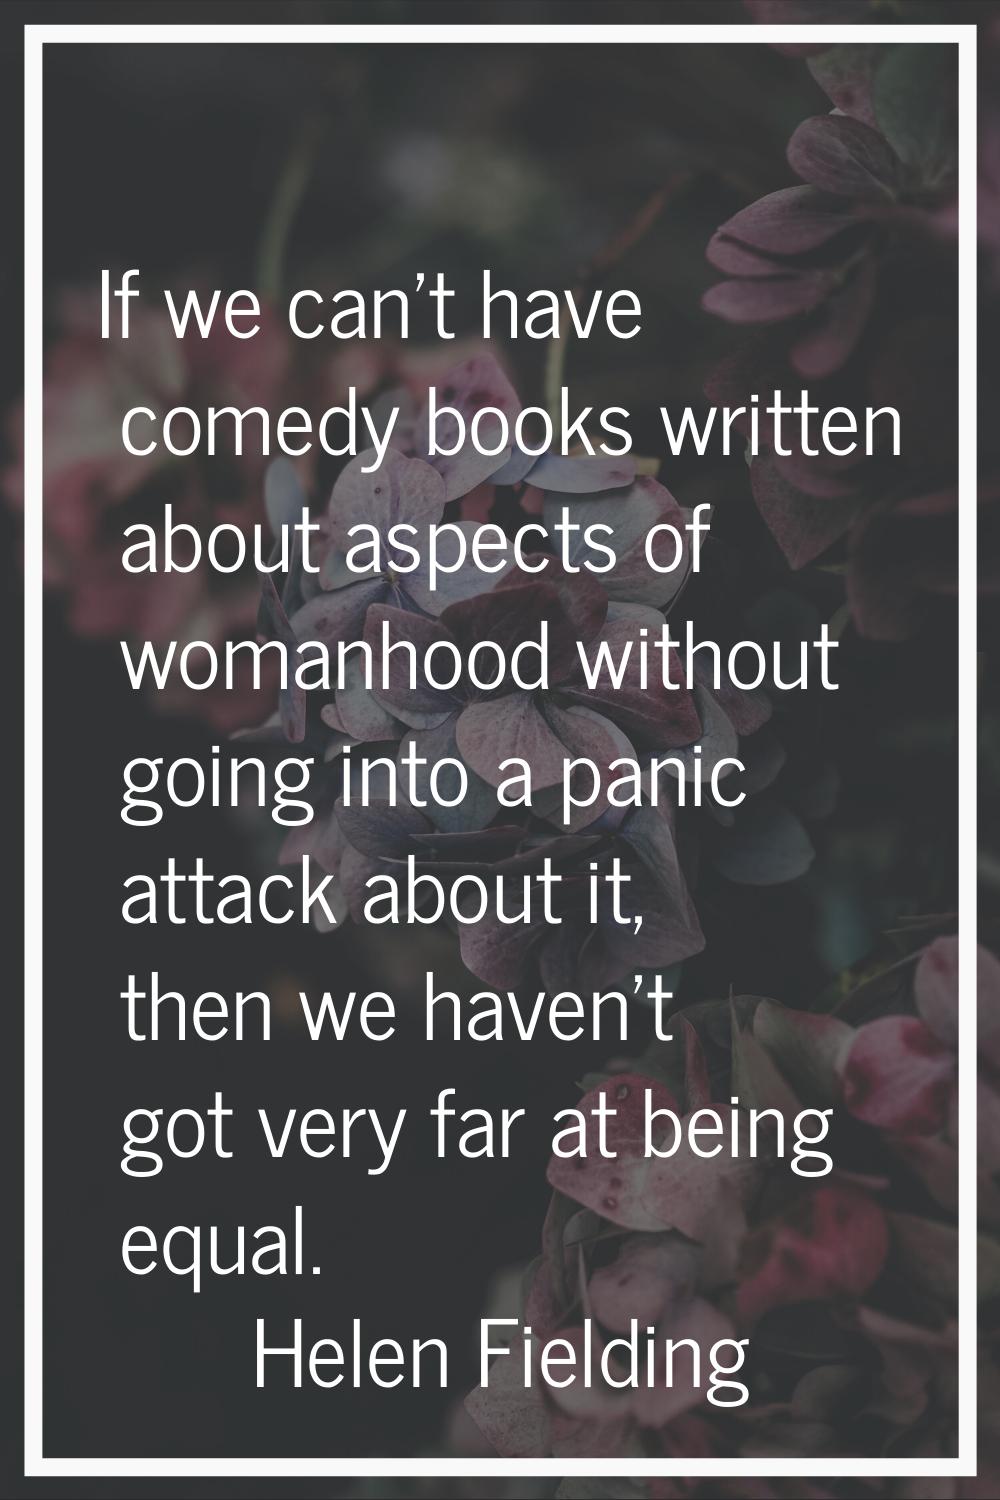 If we can't have comedy books written about aspects of womanhood without going into a panic attack 